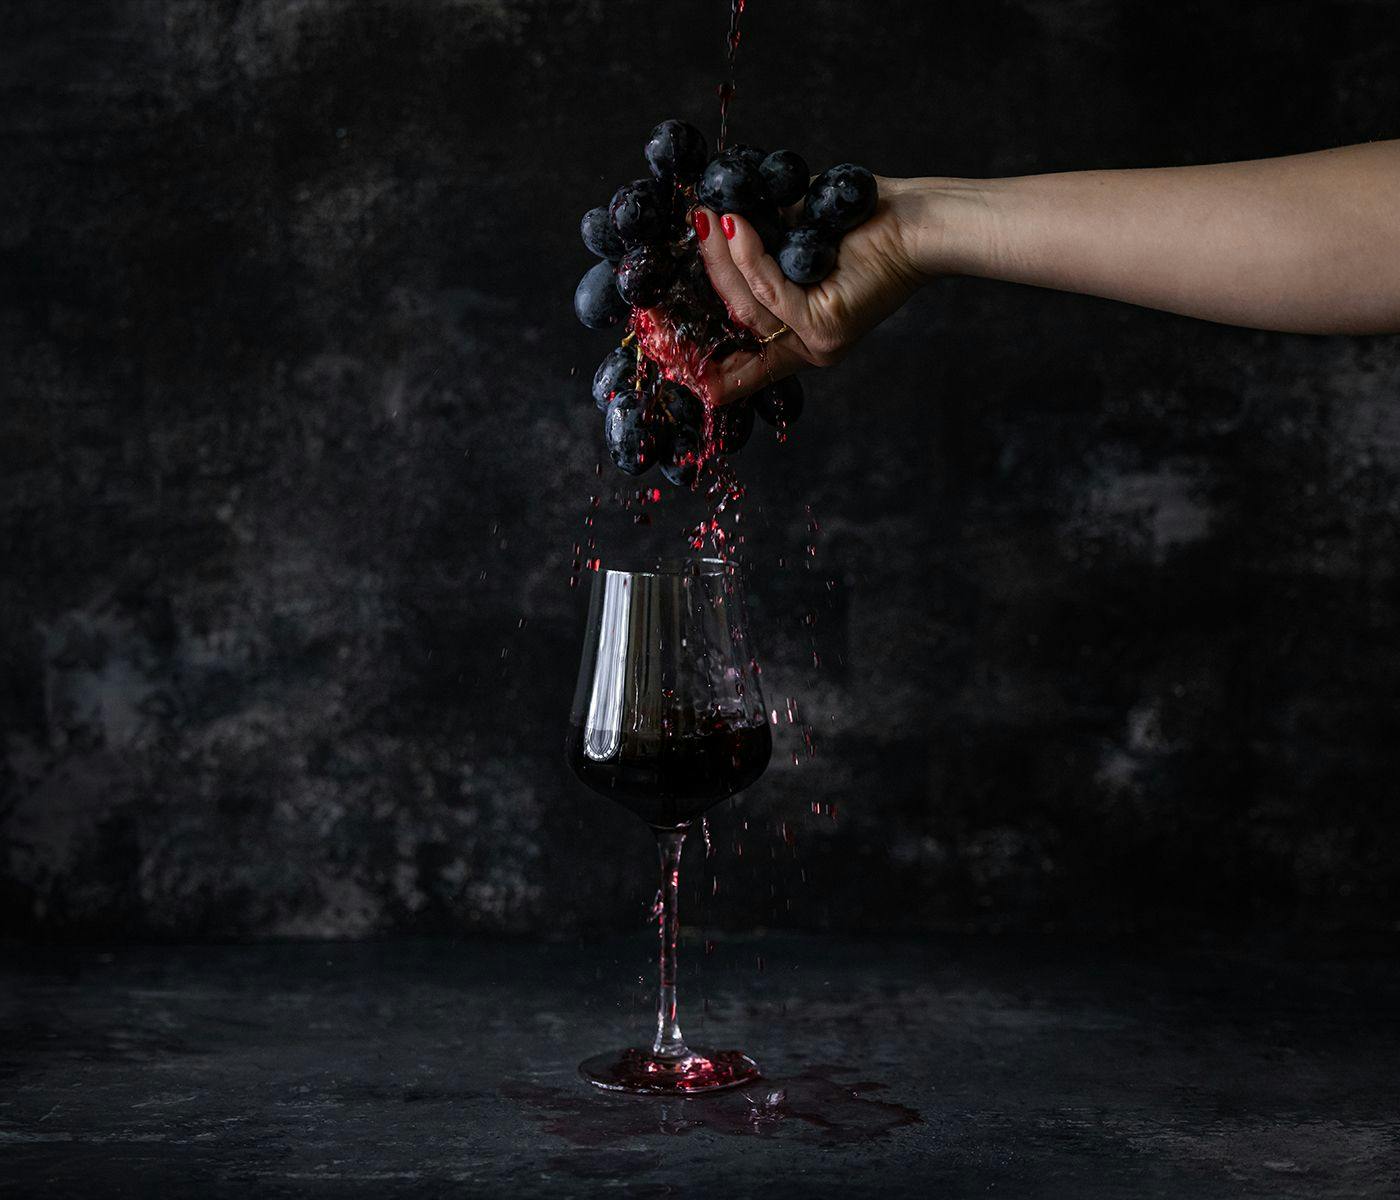 A hand crushes grapes, their juices flowing into a wine glass below.